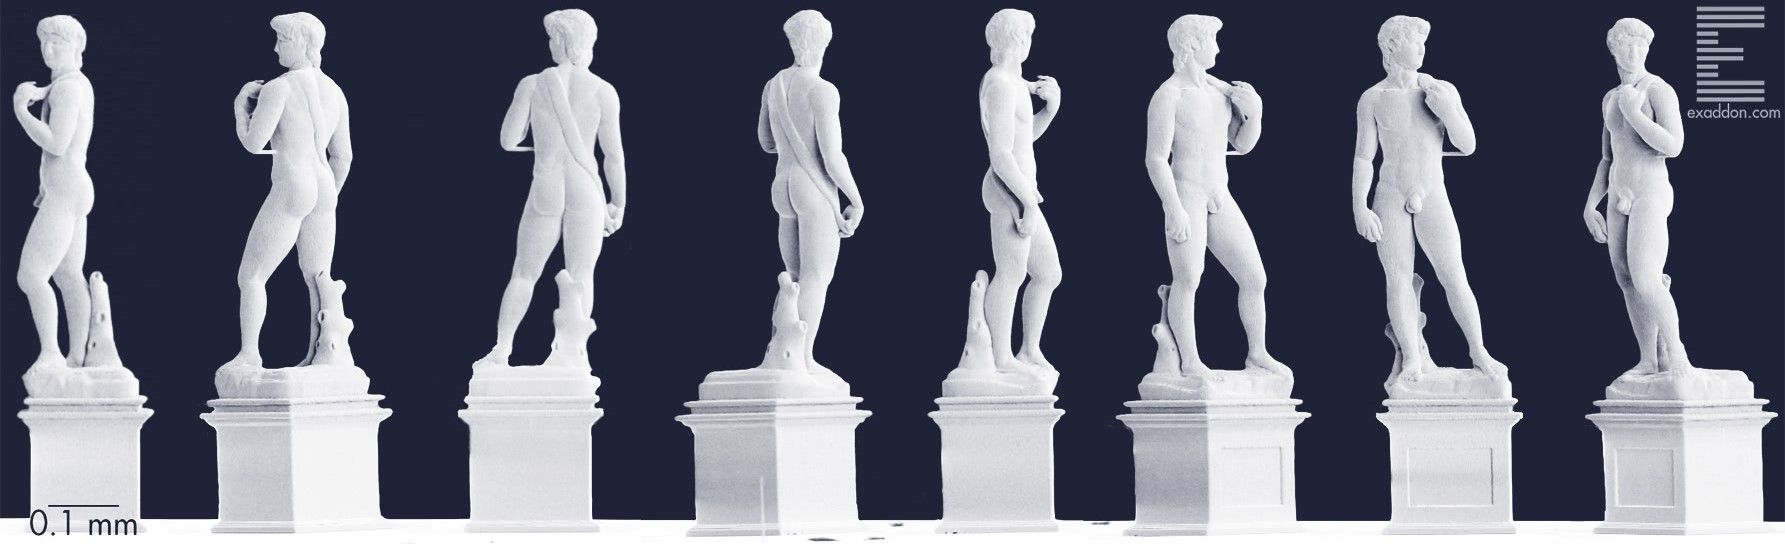 Multiple views of Michelangelo's David 3D printed in microscale, produced by Exaddon